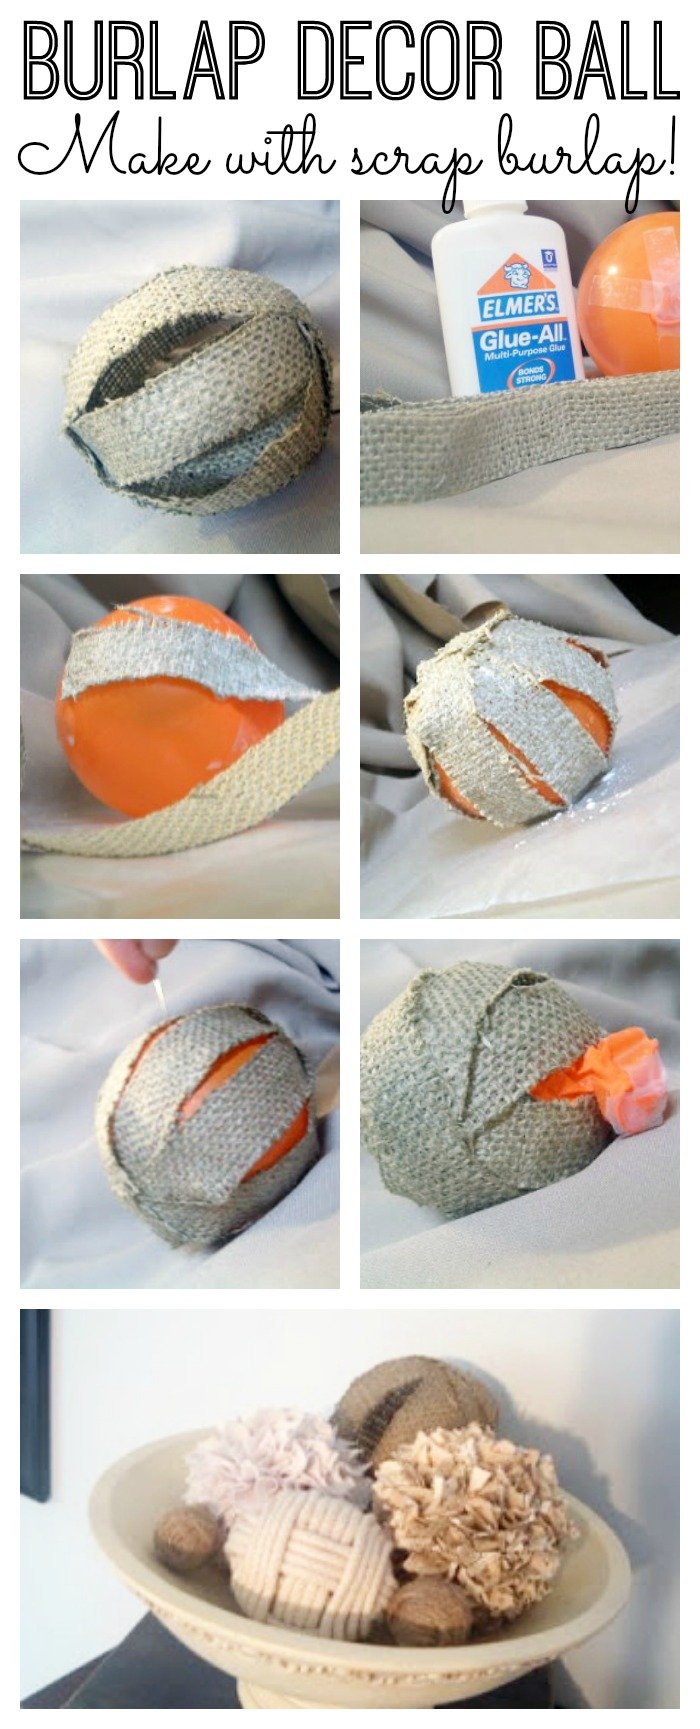 Make your own burlap decor ball with just scrap burlap, glue, and a balloon!  A quick and easy addition to your farmhouse decor!